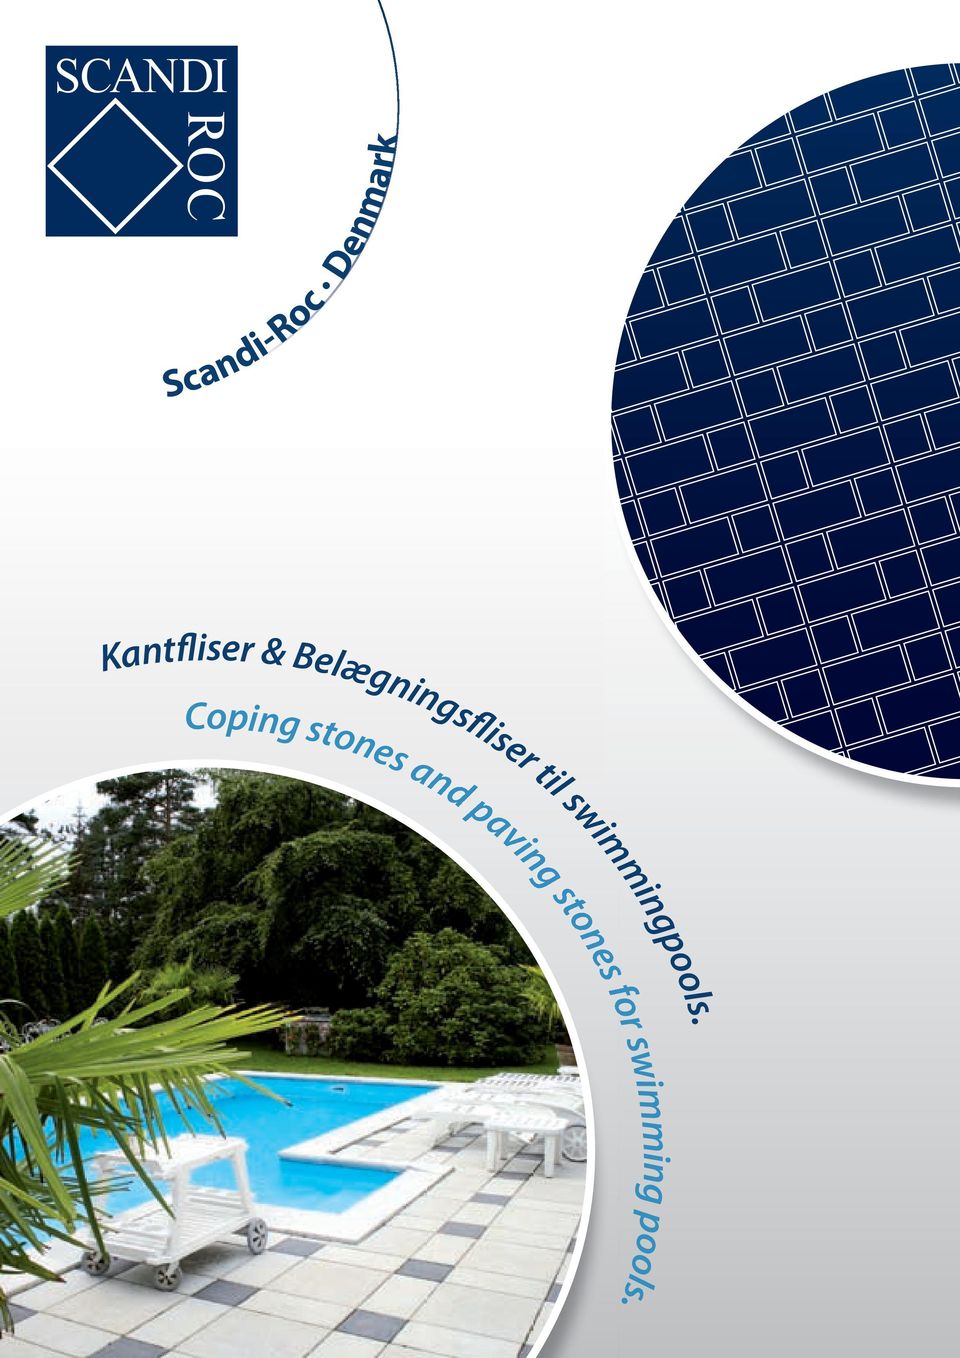 Coping stones and paving stones for swimming